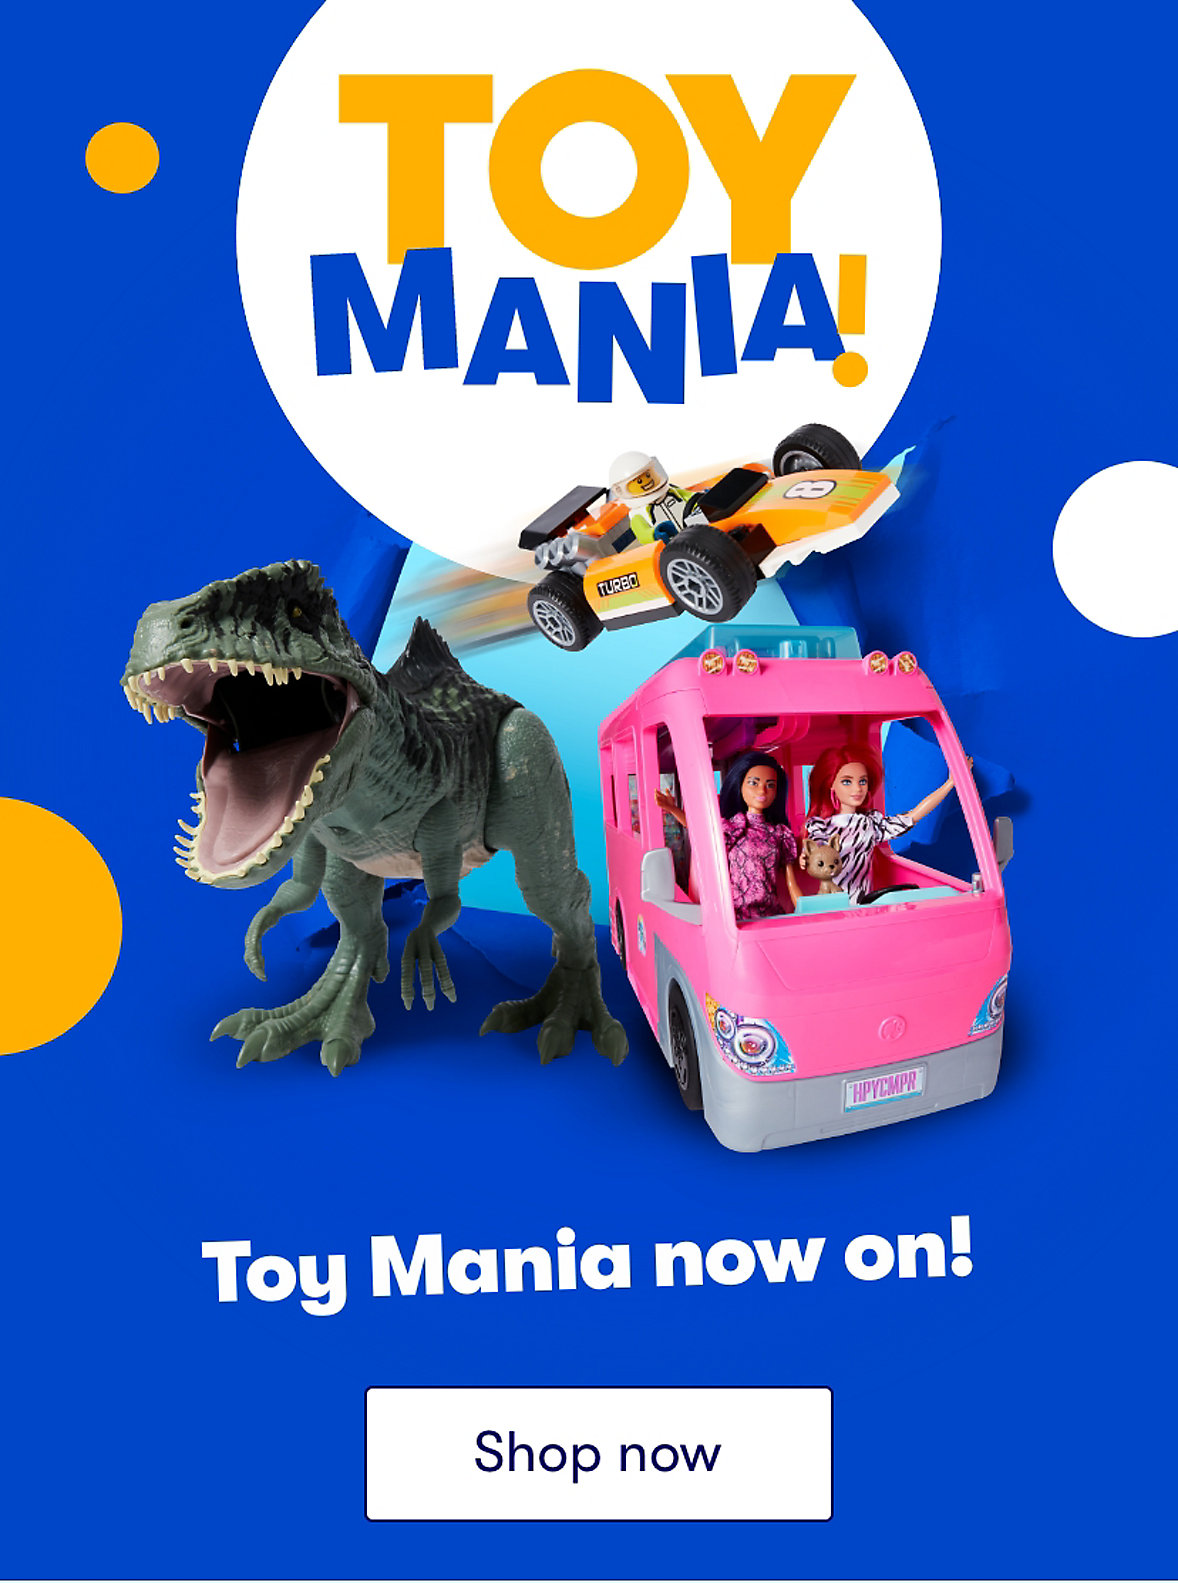 Toy Mania! Instore and Online, shop now